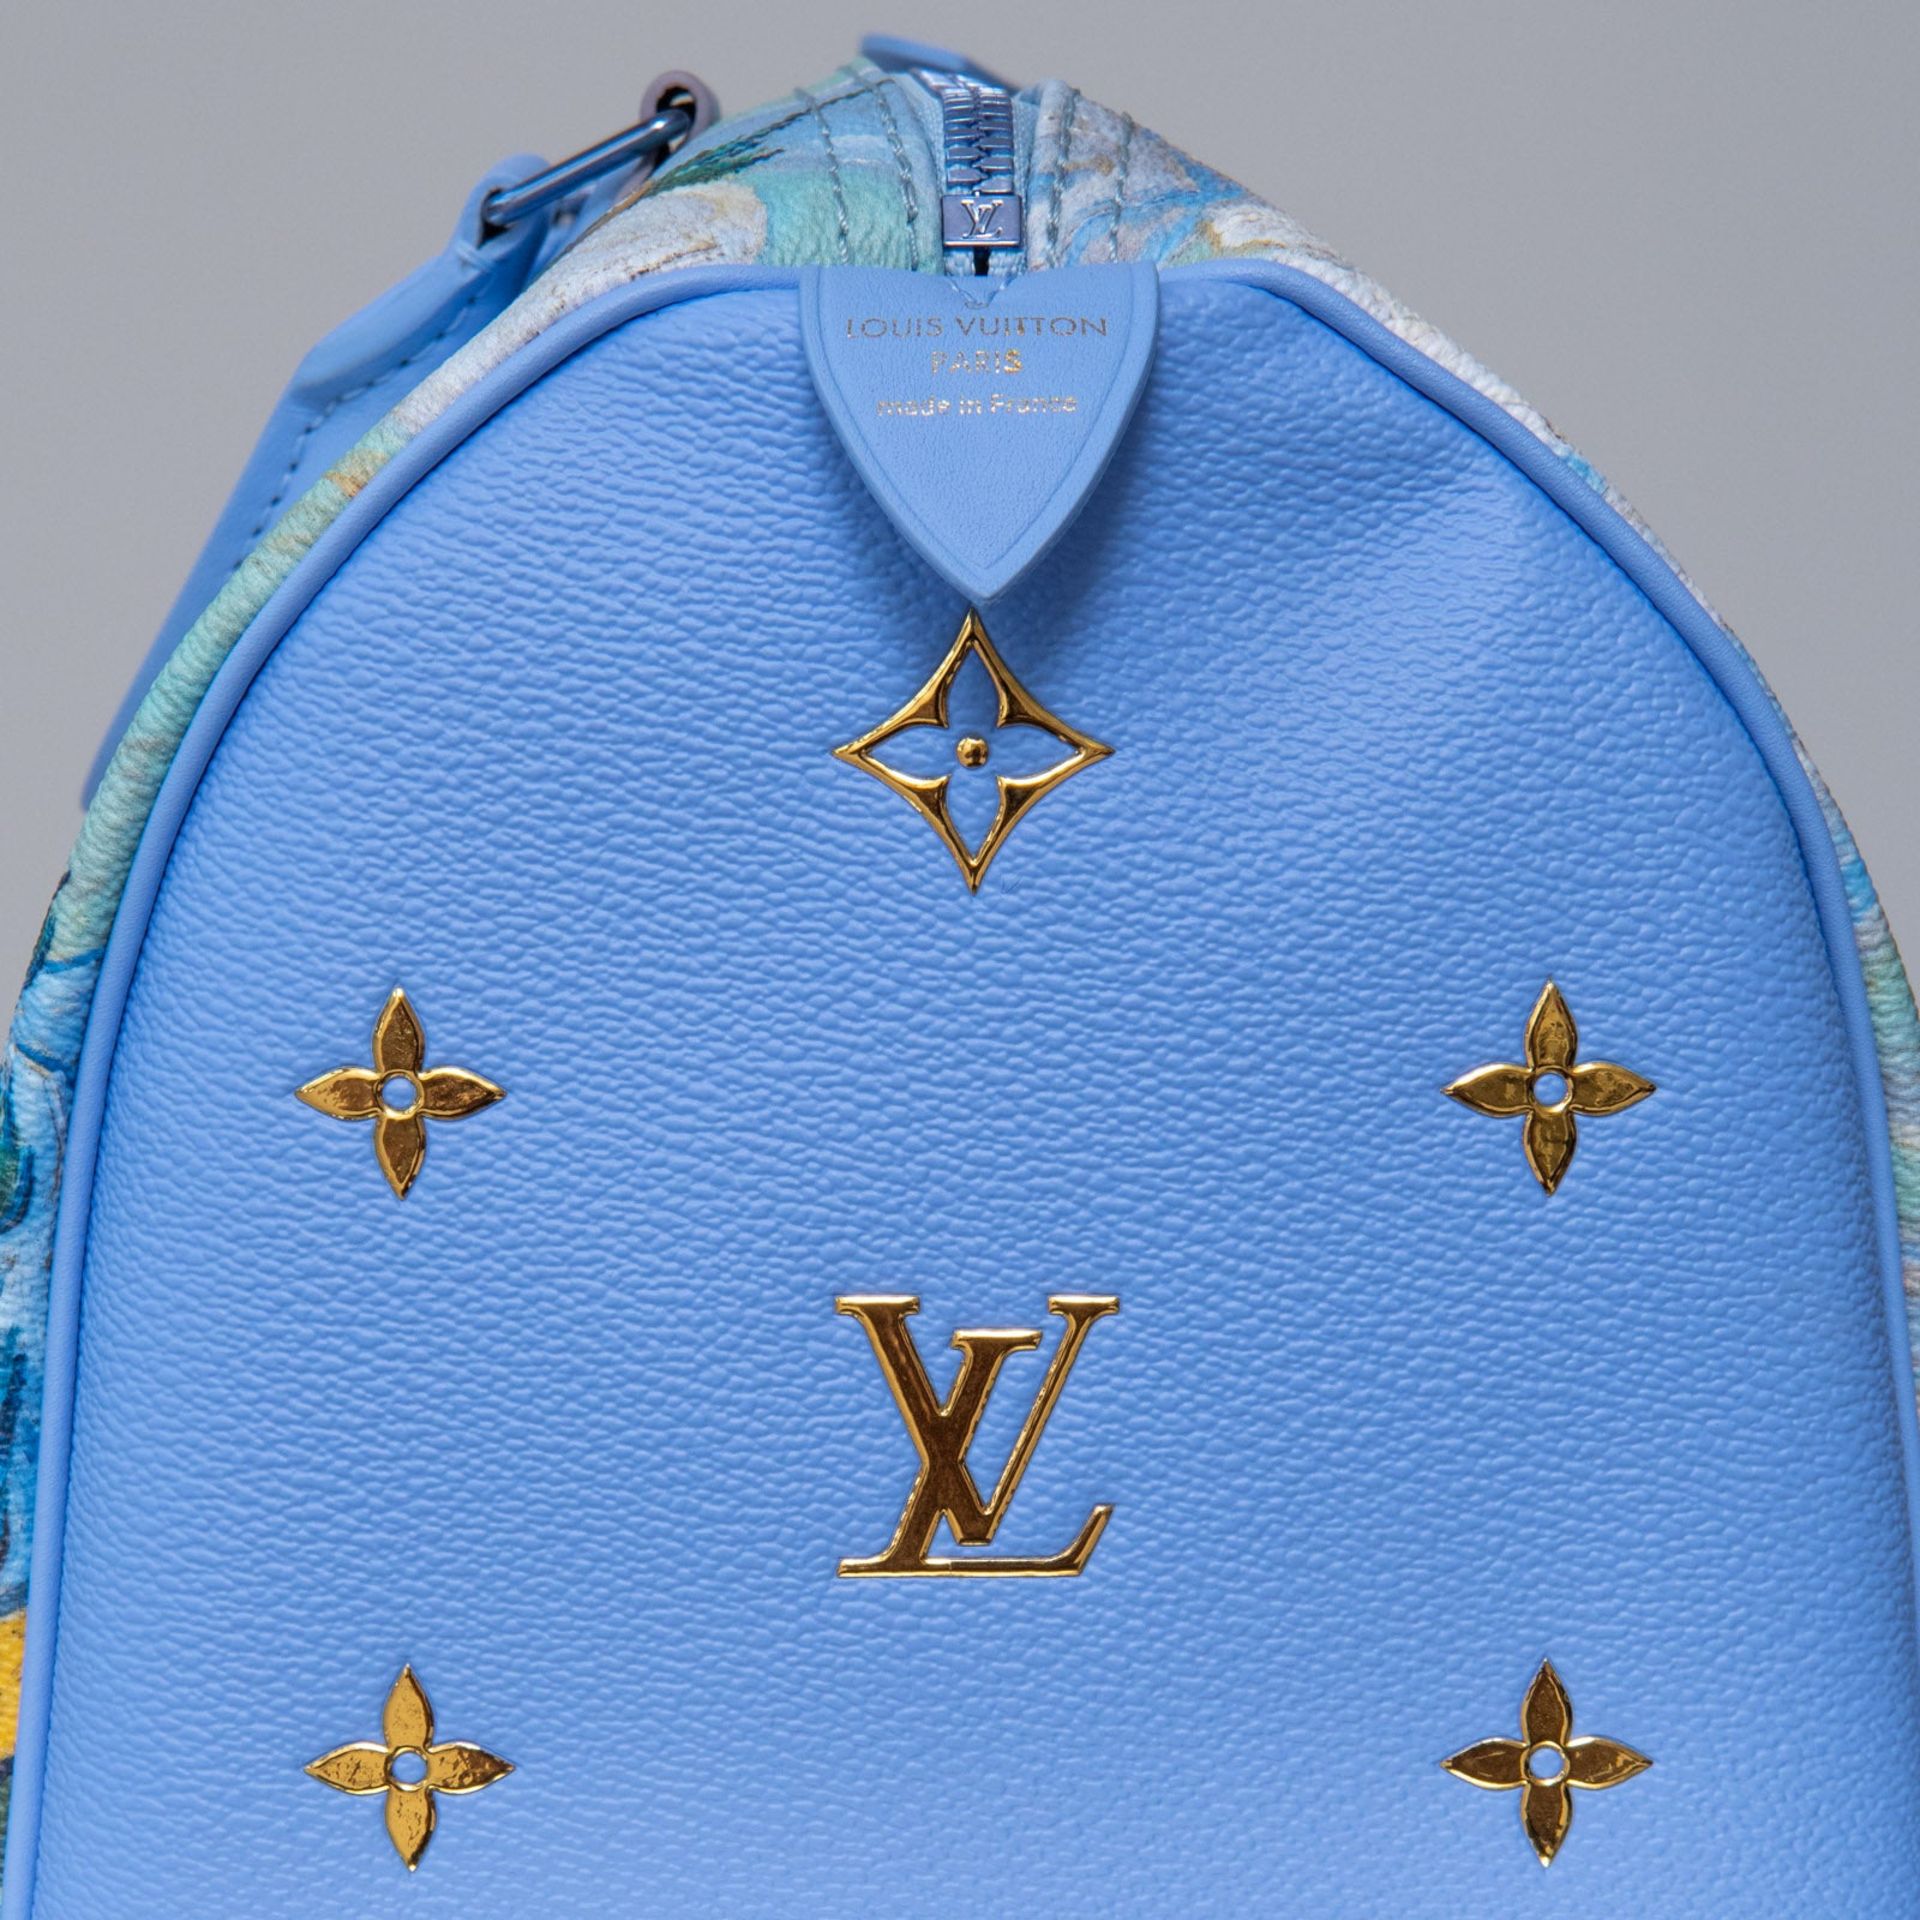 Louis Vuitton Limited Edition Lavender Speedy 30 Jeff Koons Van Gogh Masters Collection - Image 5 of 18